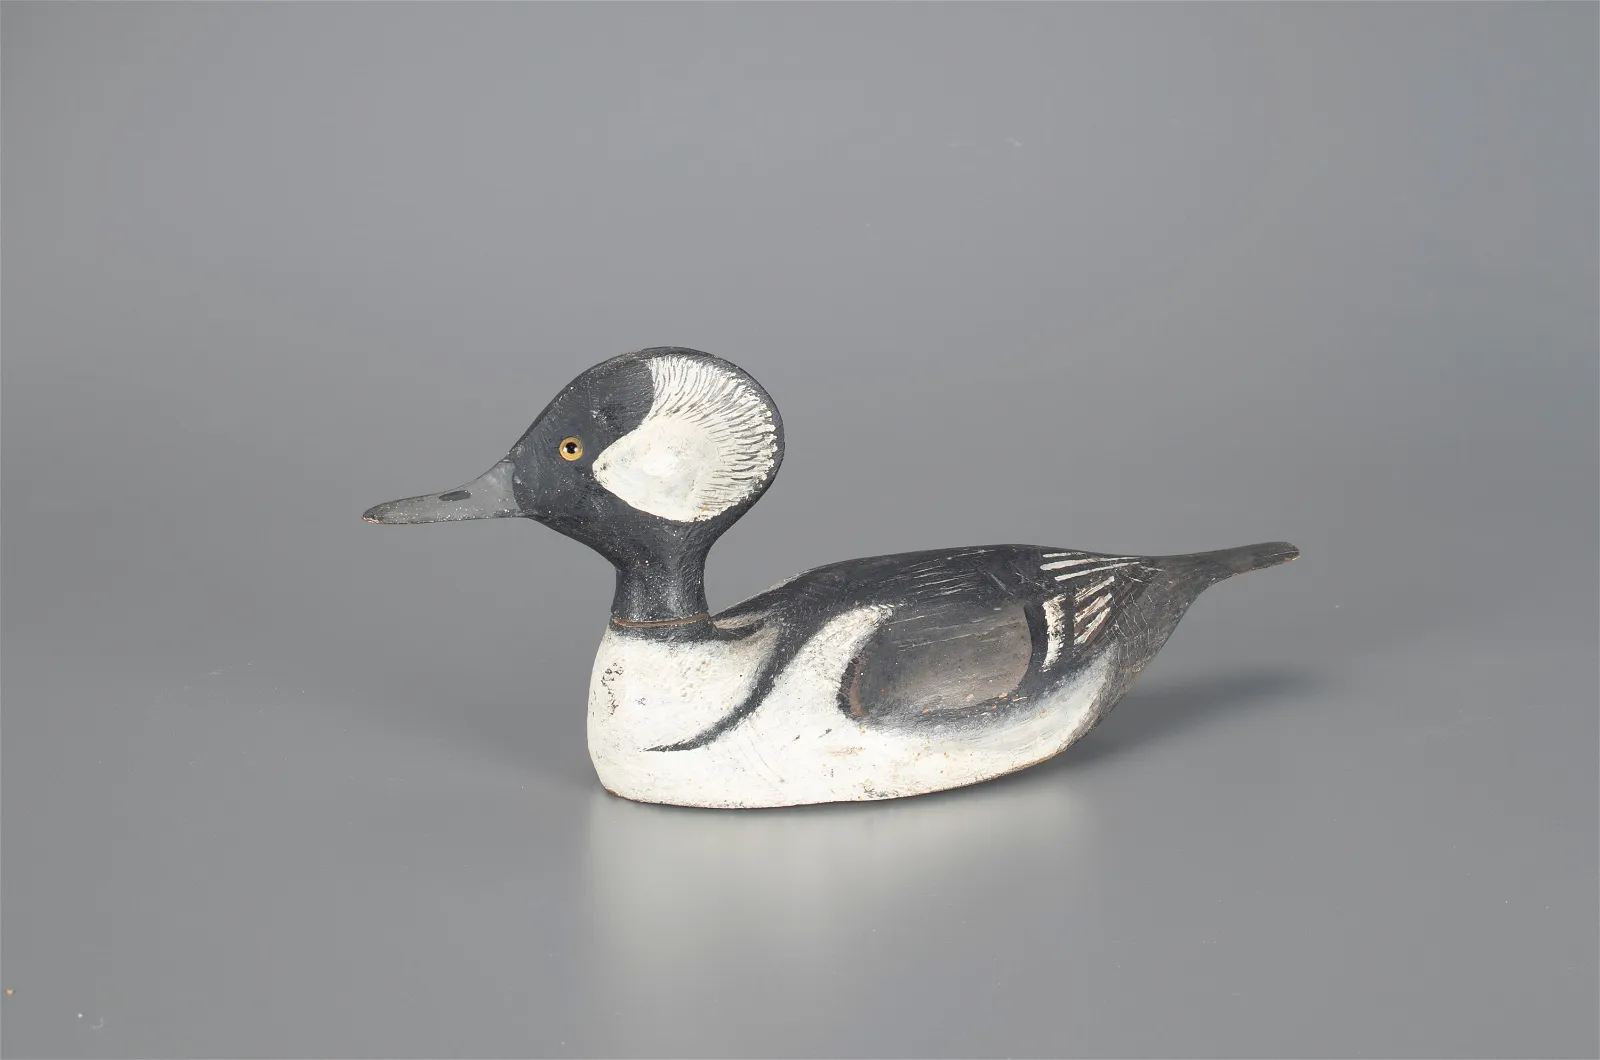 Antique decoys and sporting art aim for bidders at Copley Feb. 23-24